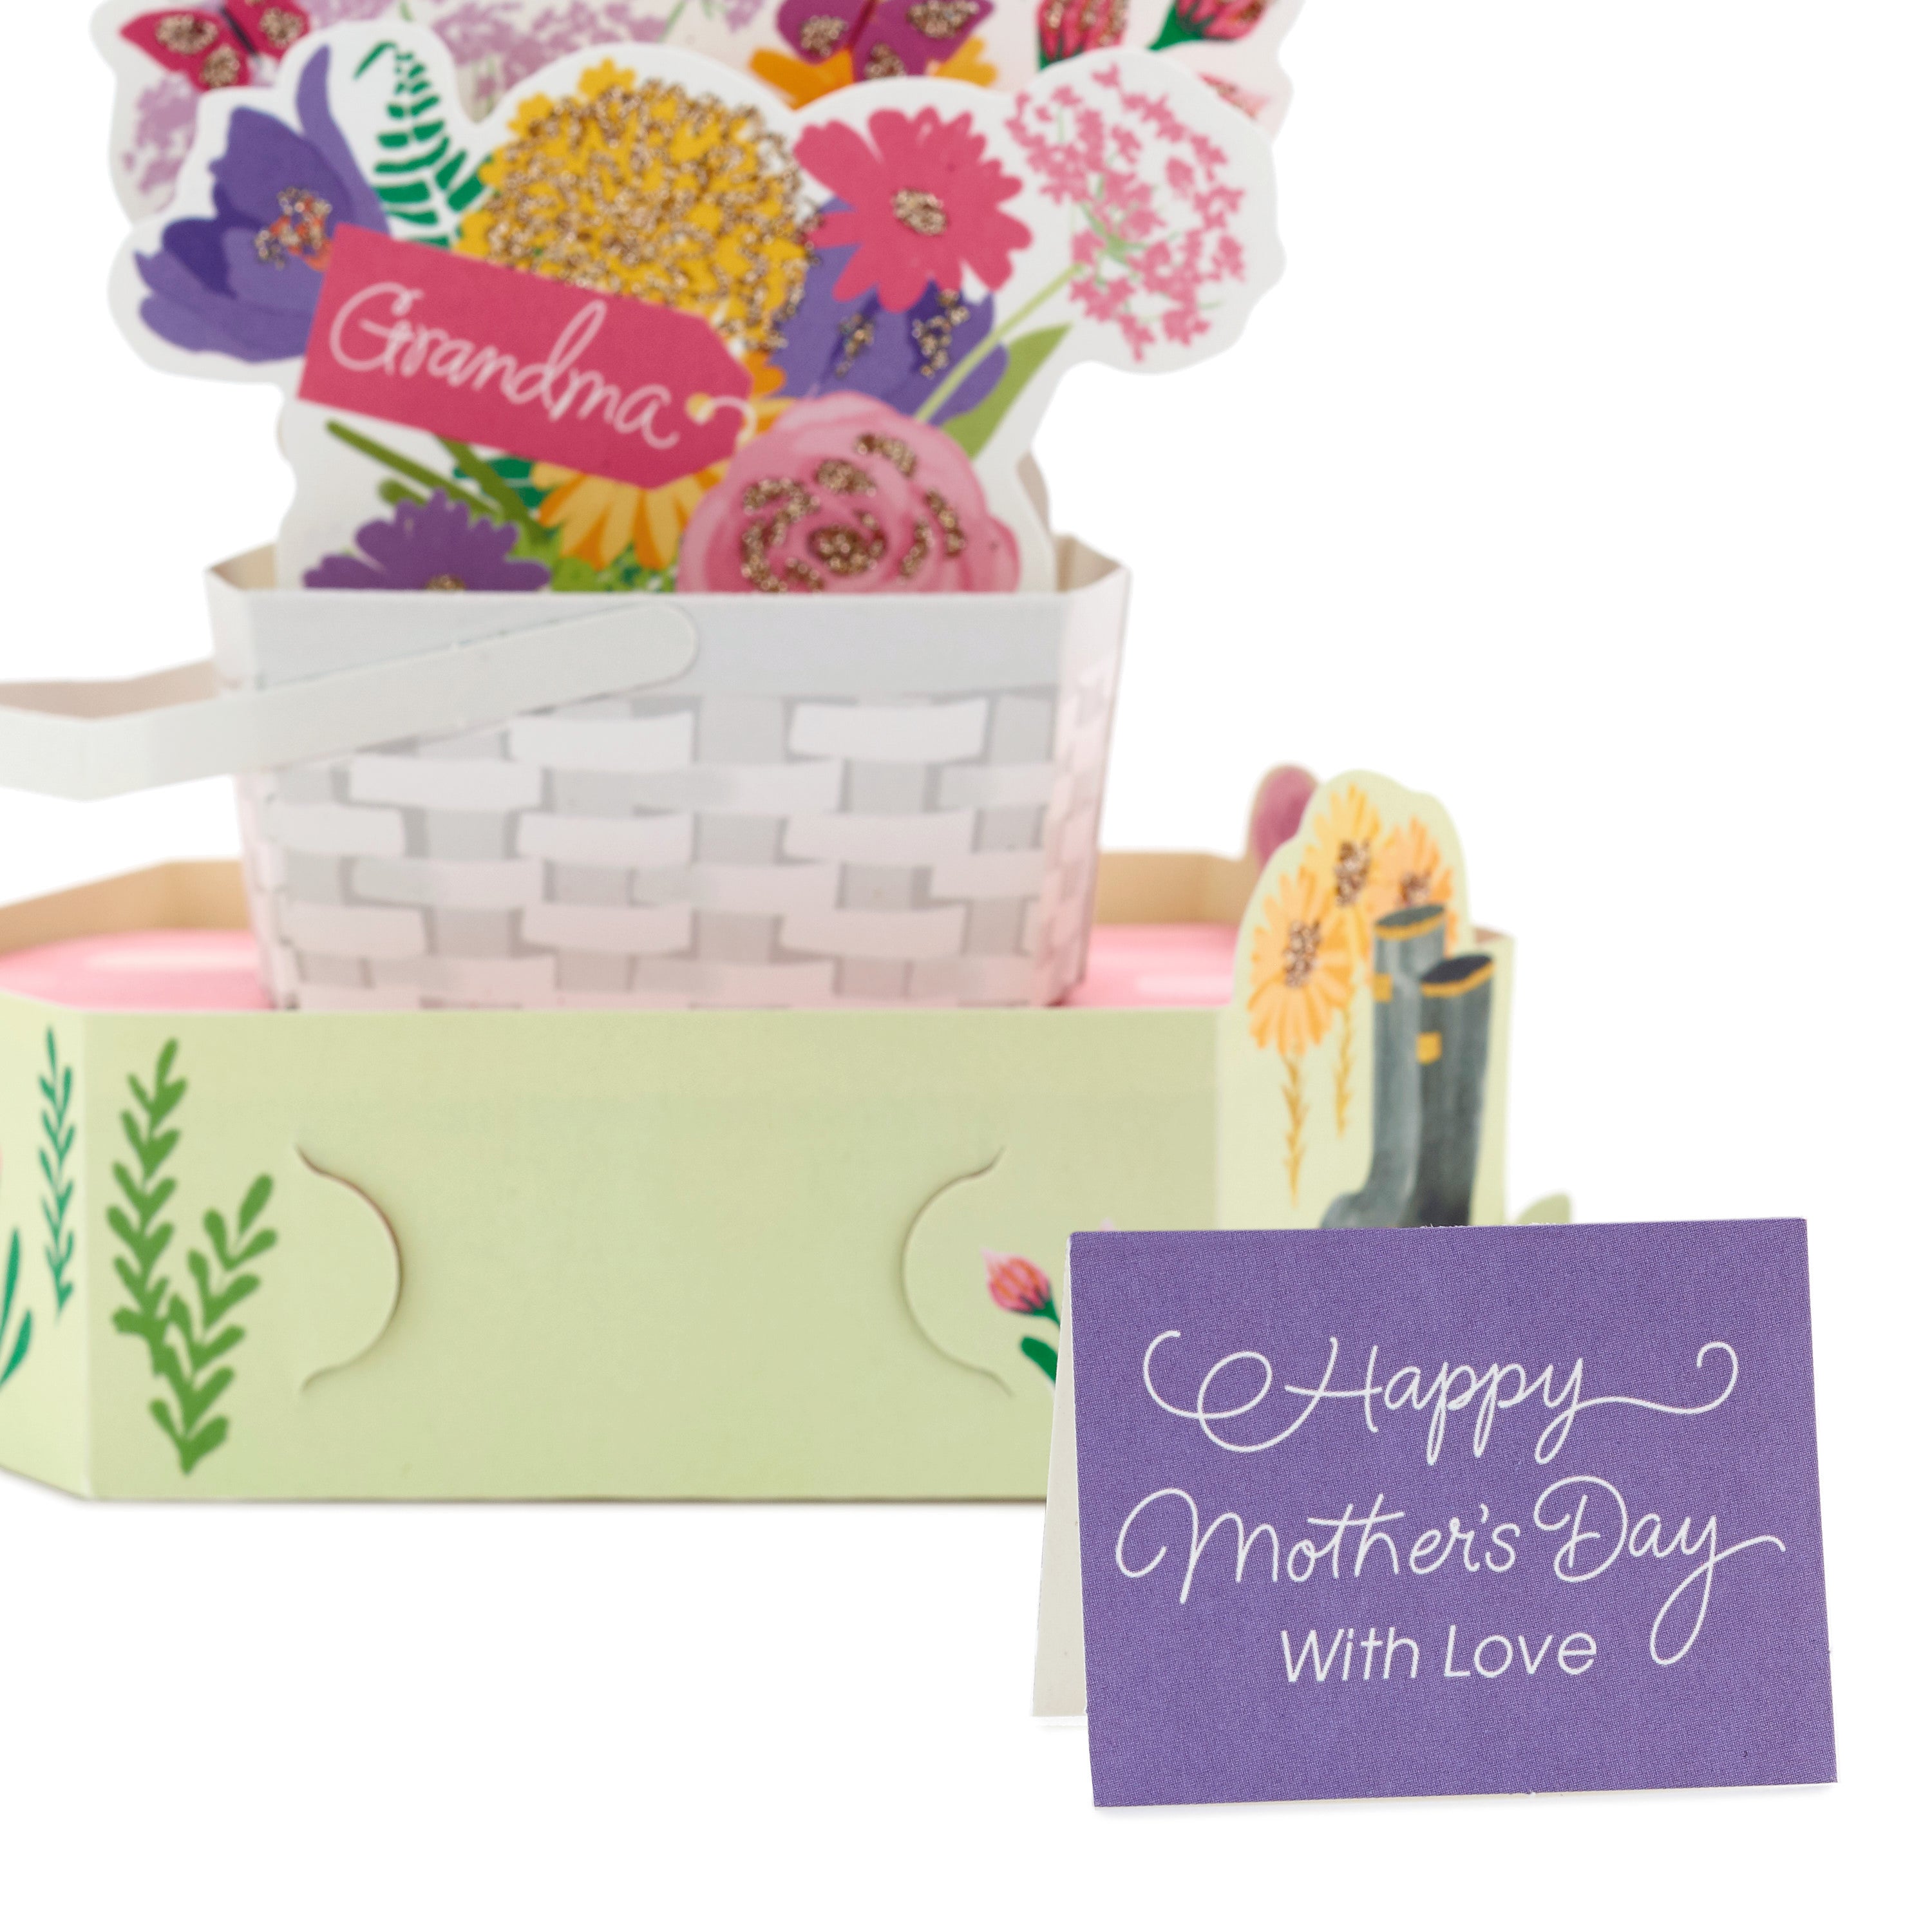 Pop Up Mothers Day Card for Grandma (Displayable Basket of Flowers)